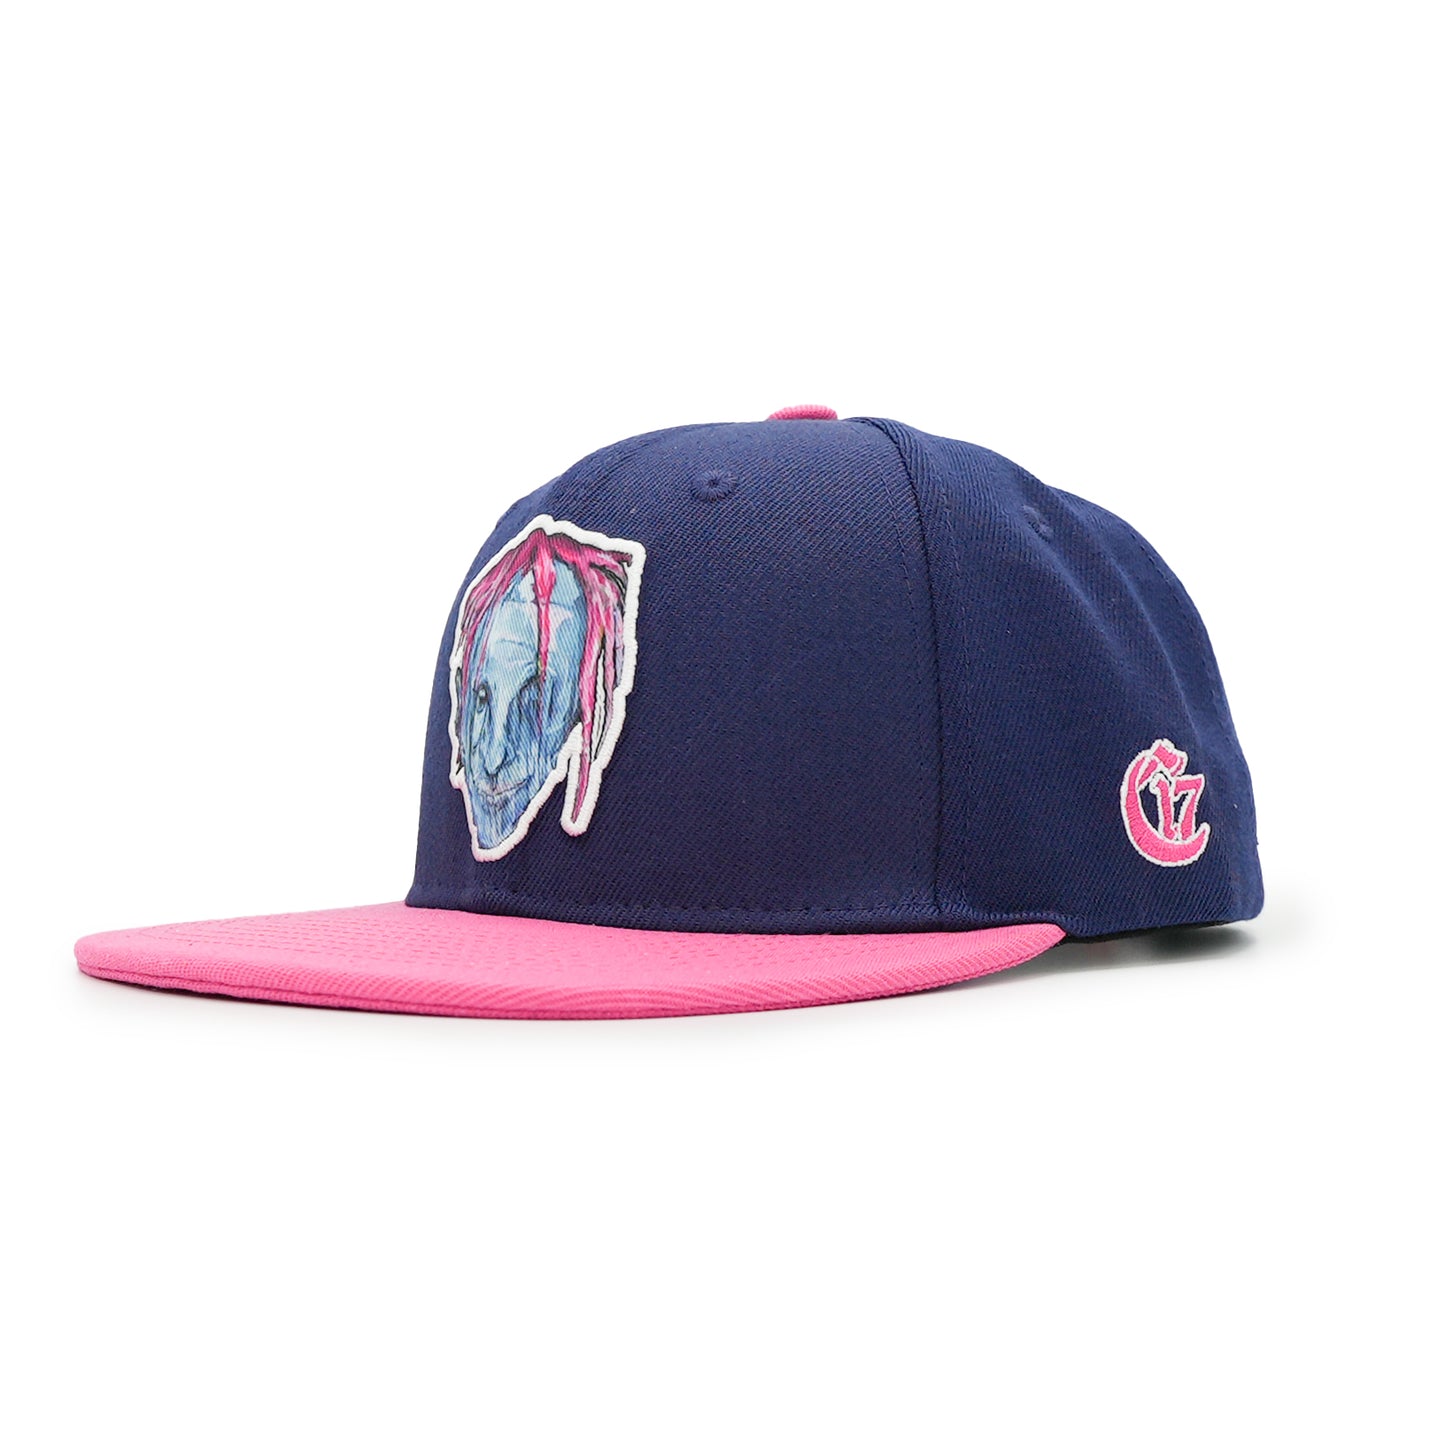 Elements Snapback - Stalewind - Navy and Pink